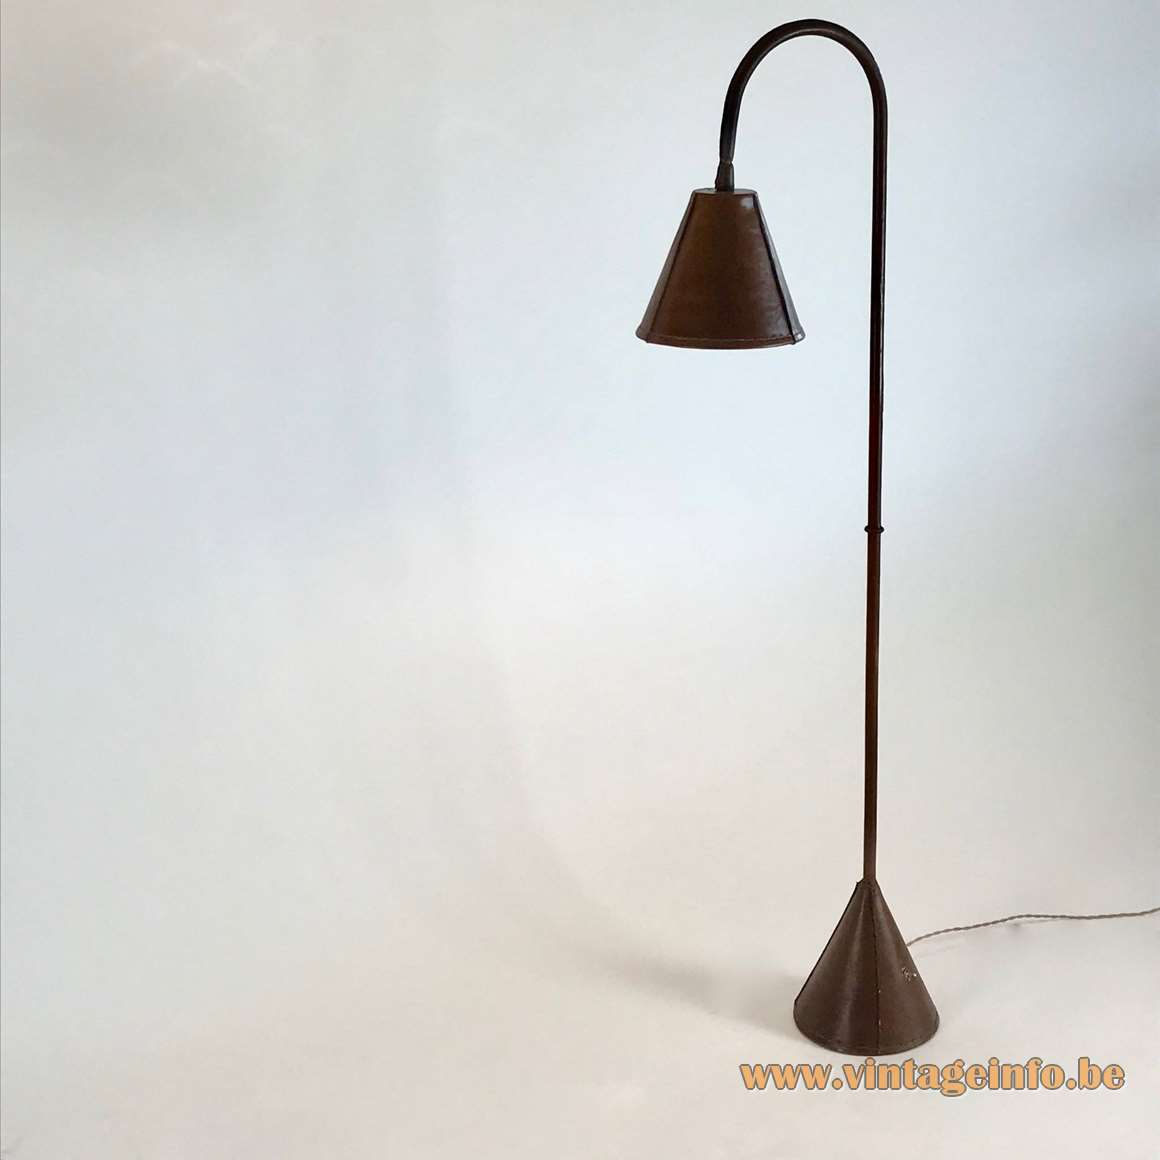 Valenti Leather Floor Lamp Vintage Info All About Vintage with regard to size 1160 X 1160